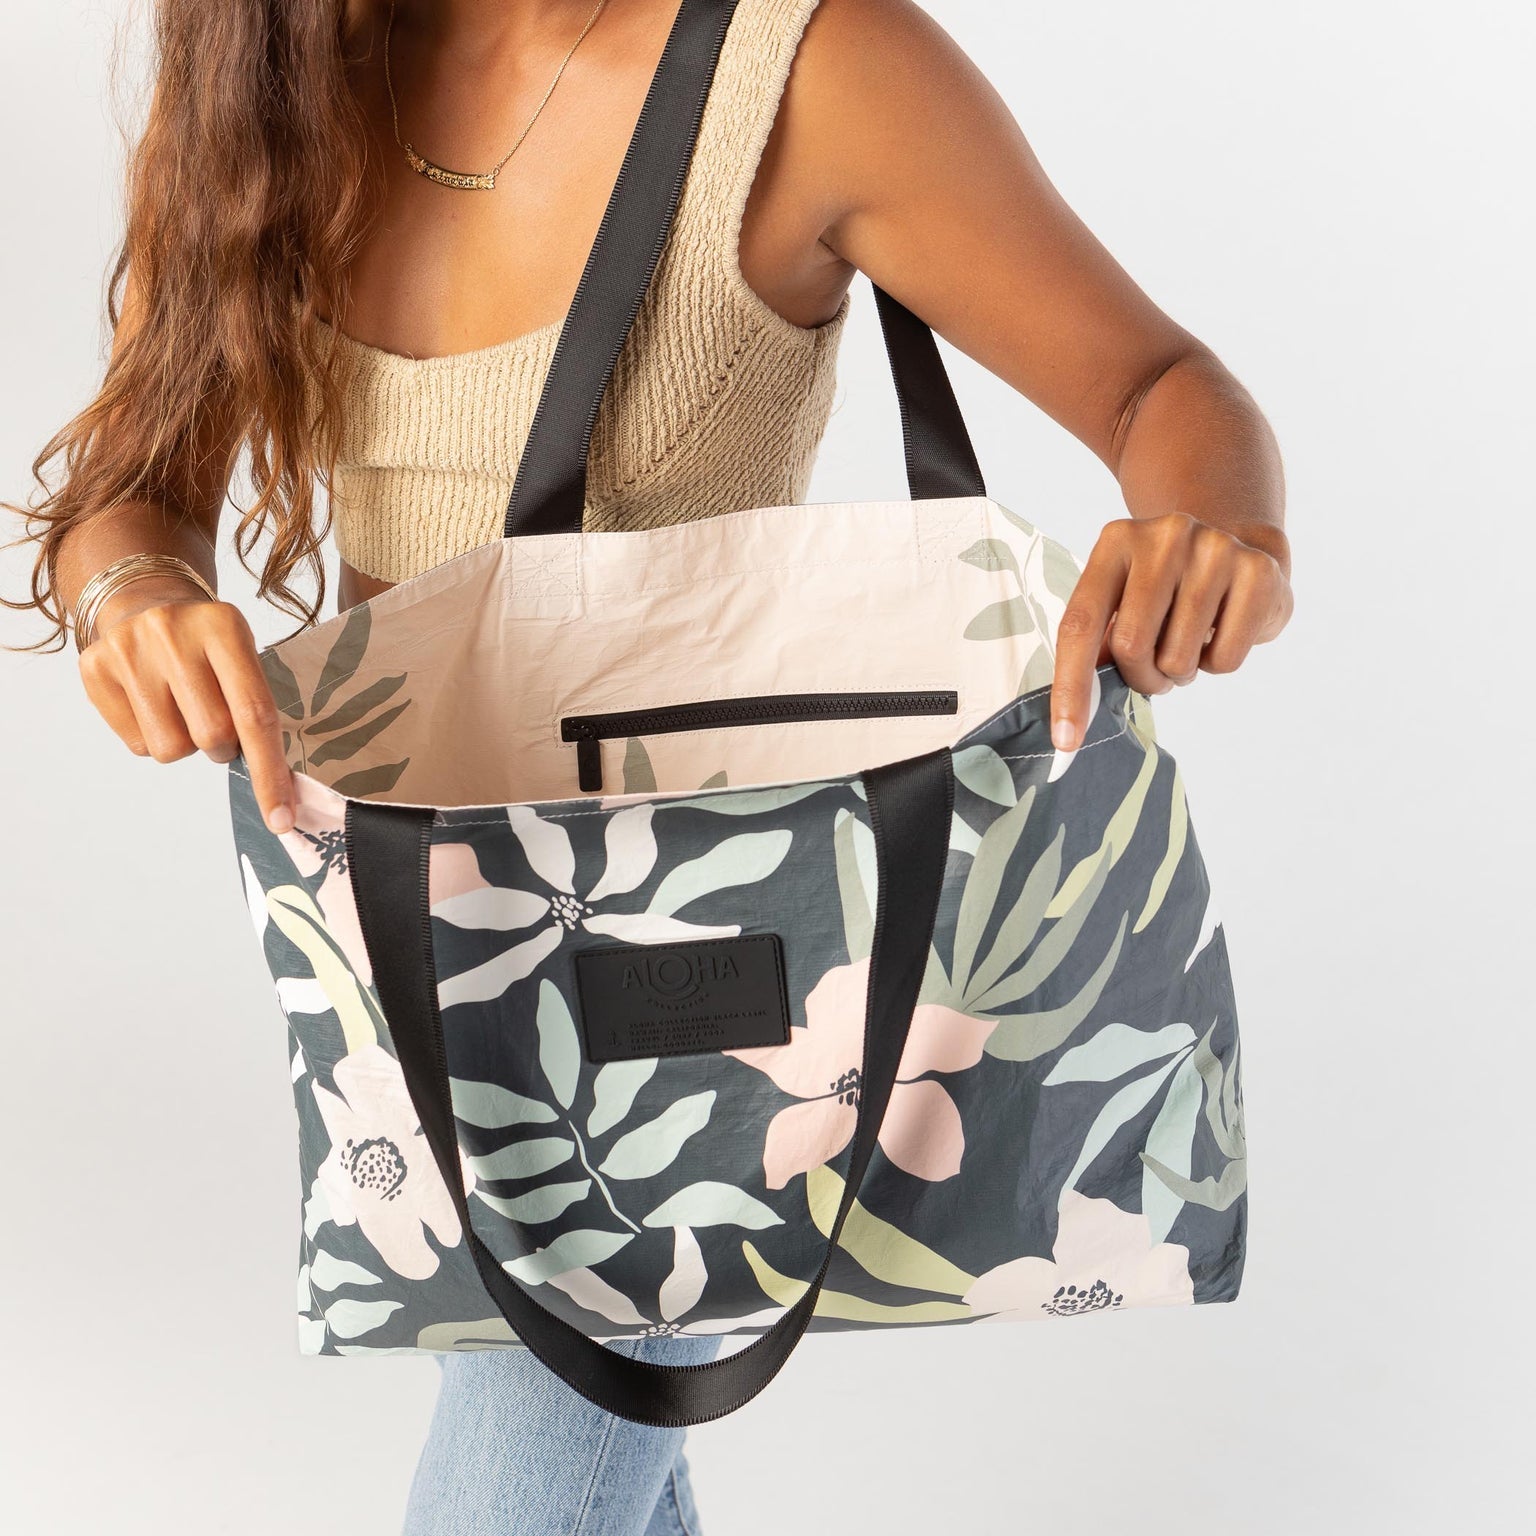 If you love flowers, you need this reversible tote.